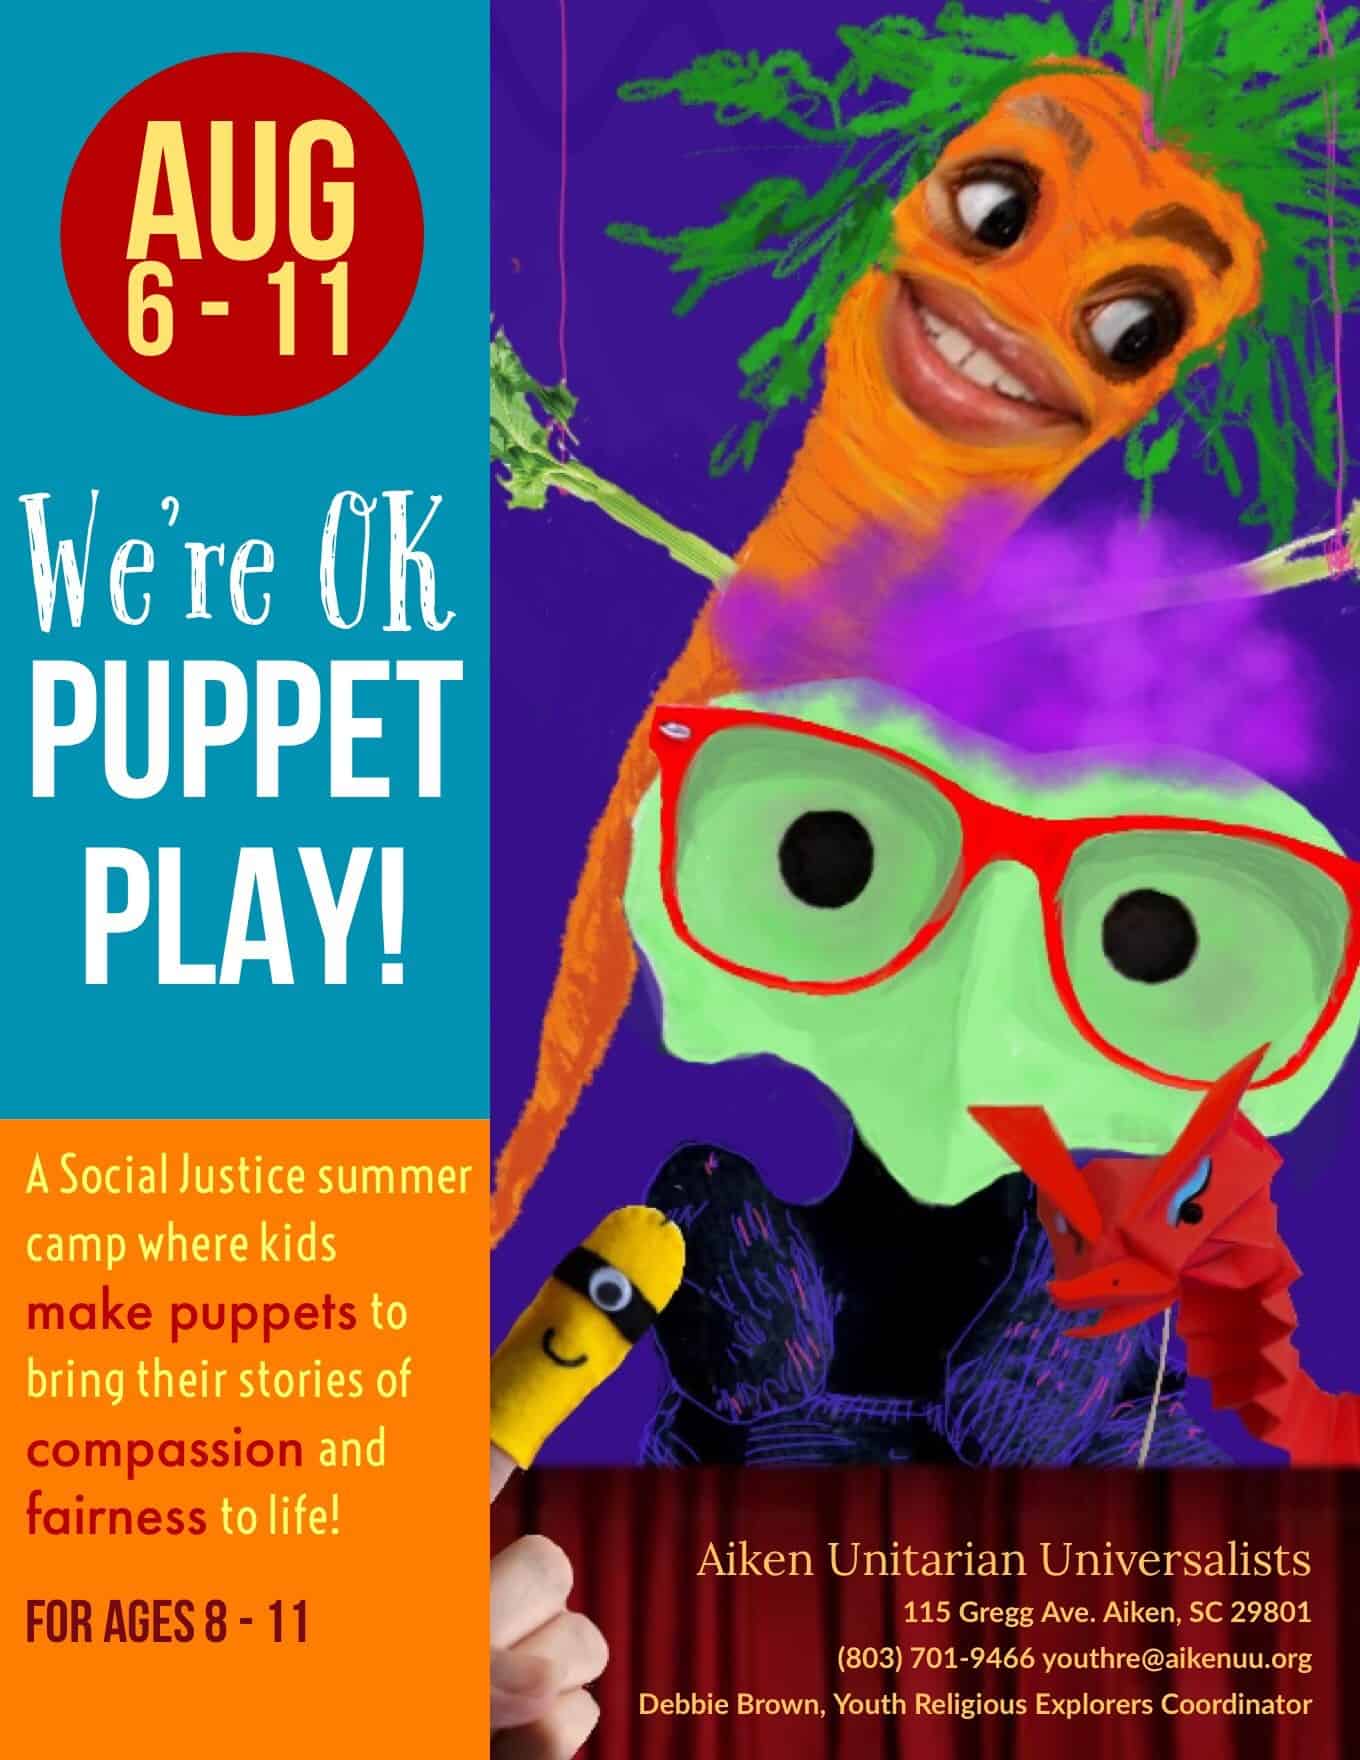 We're Ok Puppet Play Flyer August 6-11 Summer Camp for Ages 8-11